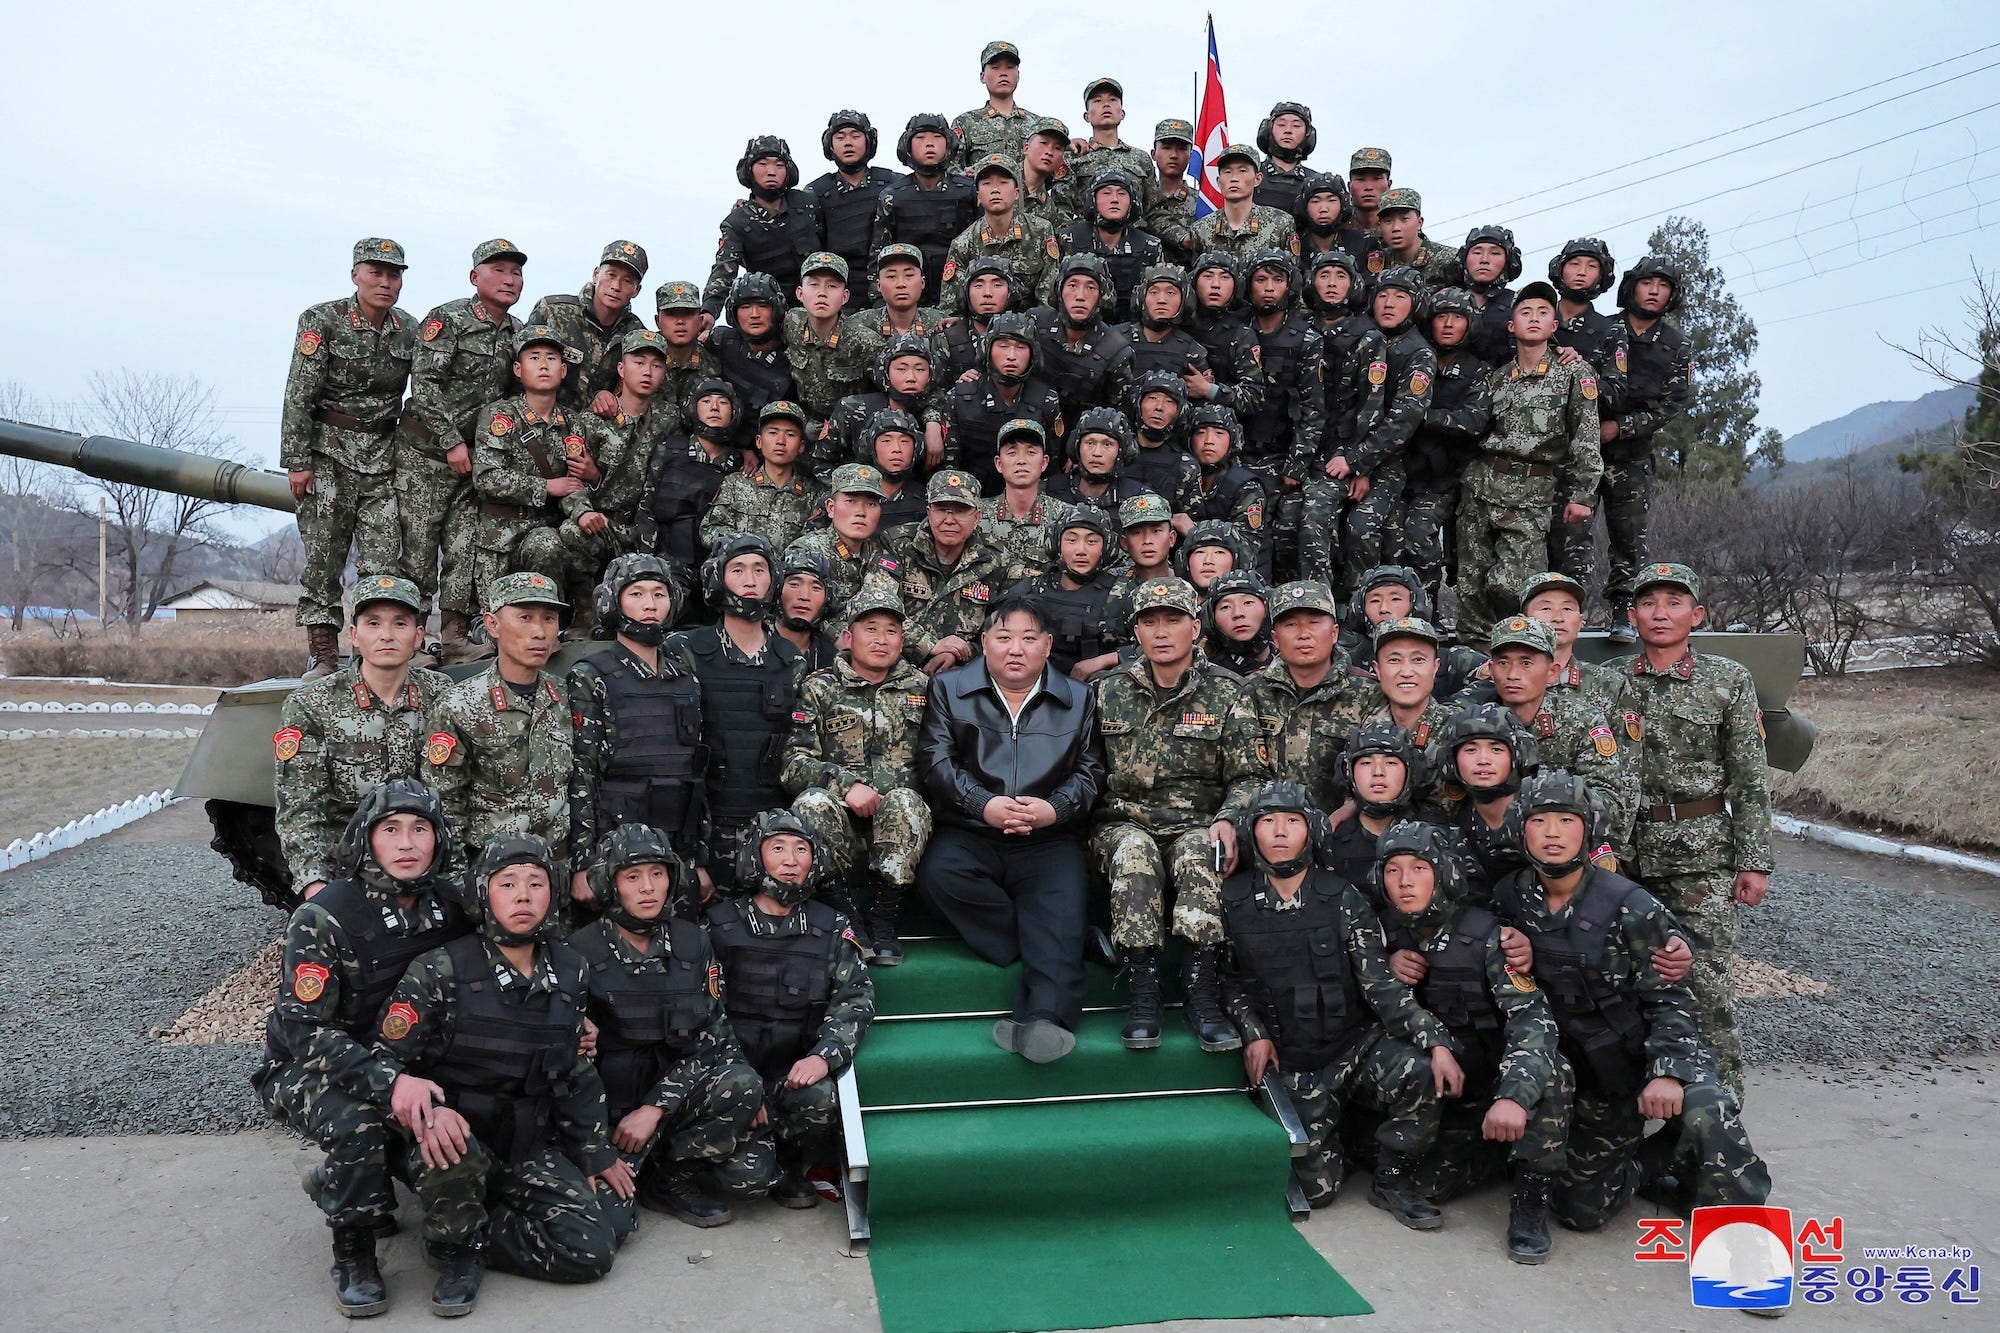 North Korean leader Kim Jong Un poses with soldiers